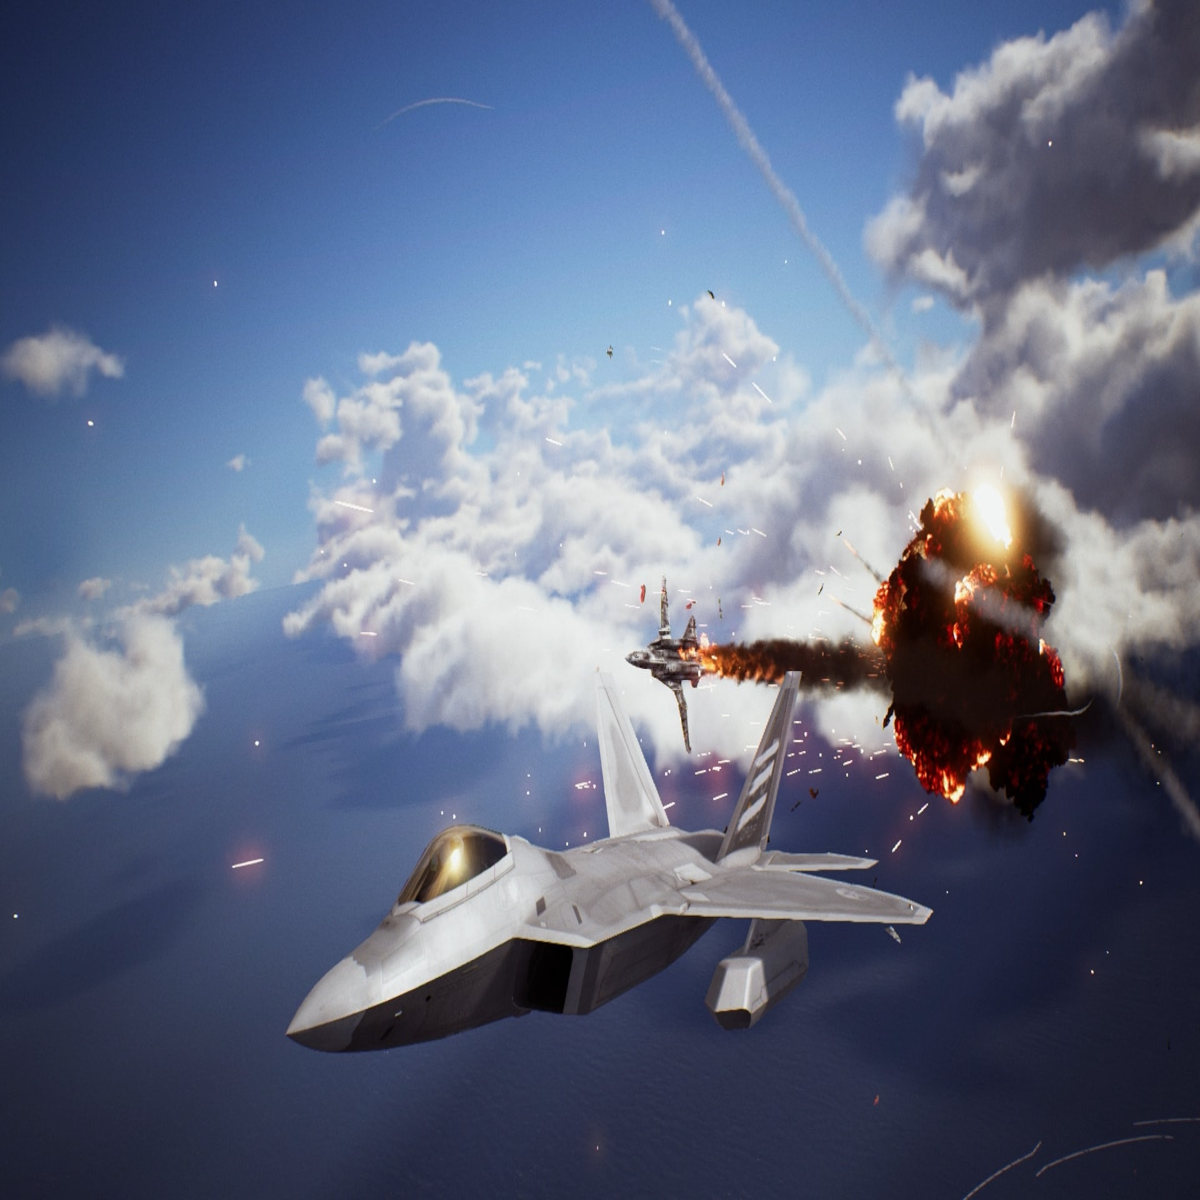 Ace Combat 7 Review - Up in the Air (PS4)